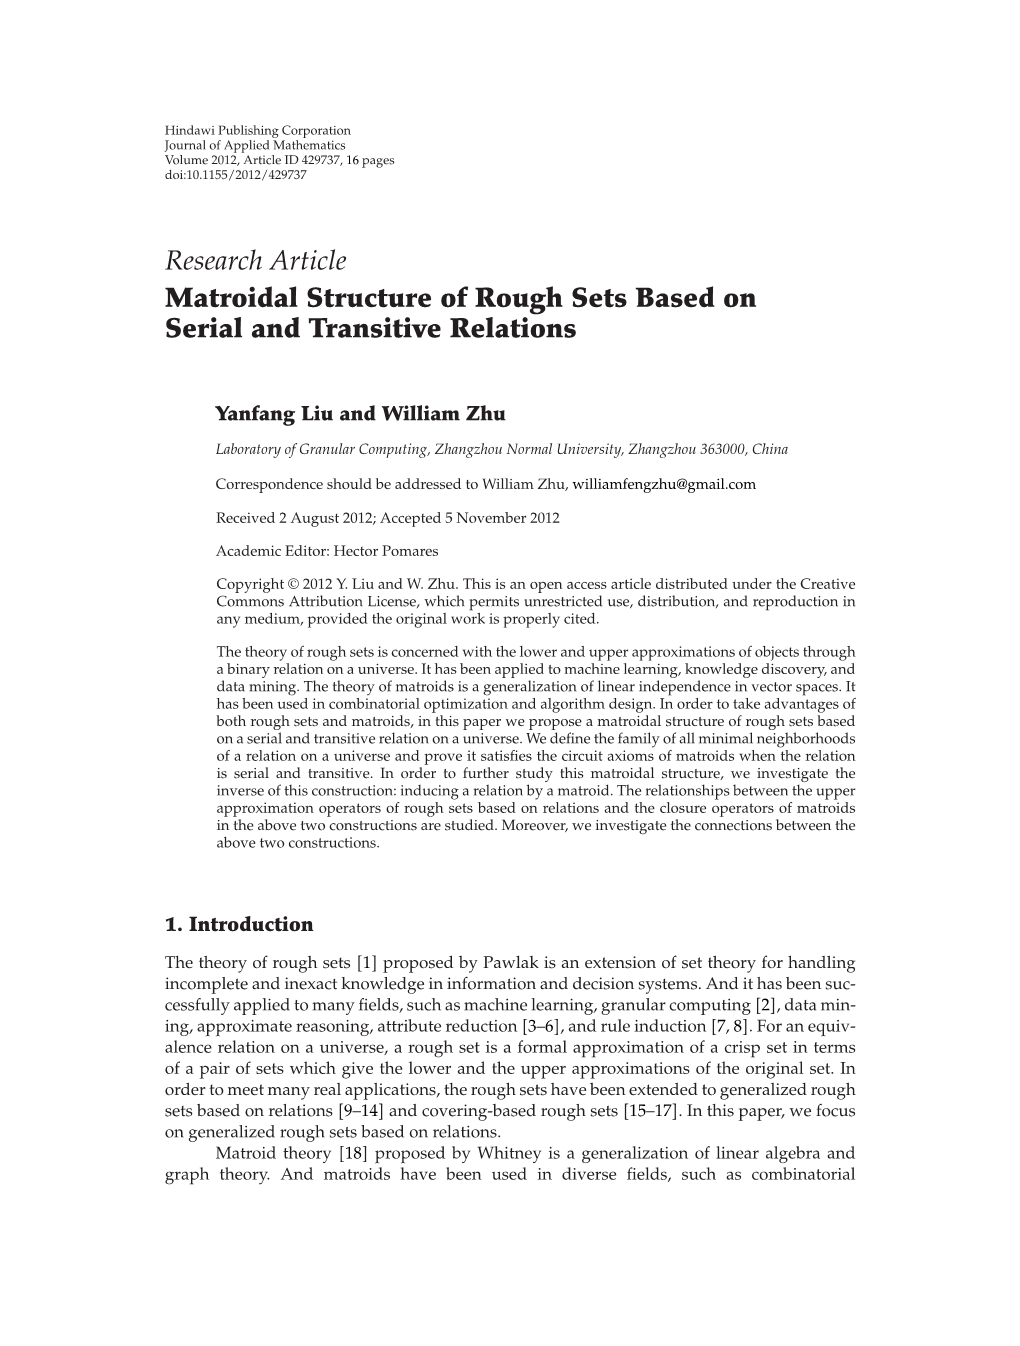 Research Article Matroidal Structure of Rough Sets Based on Serial and Transitive Relations